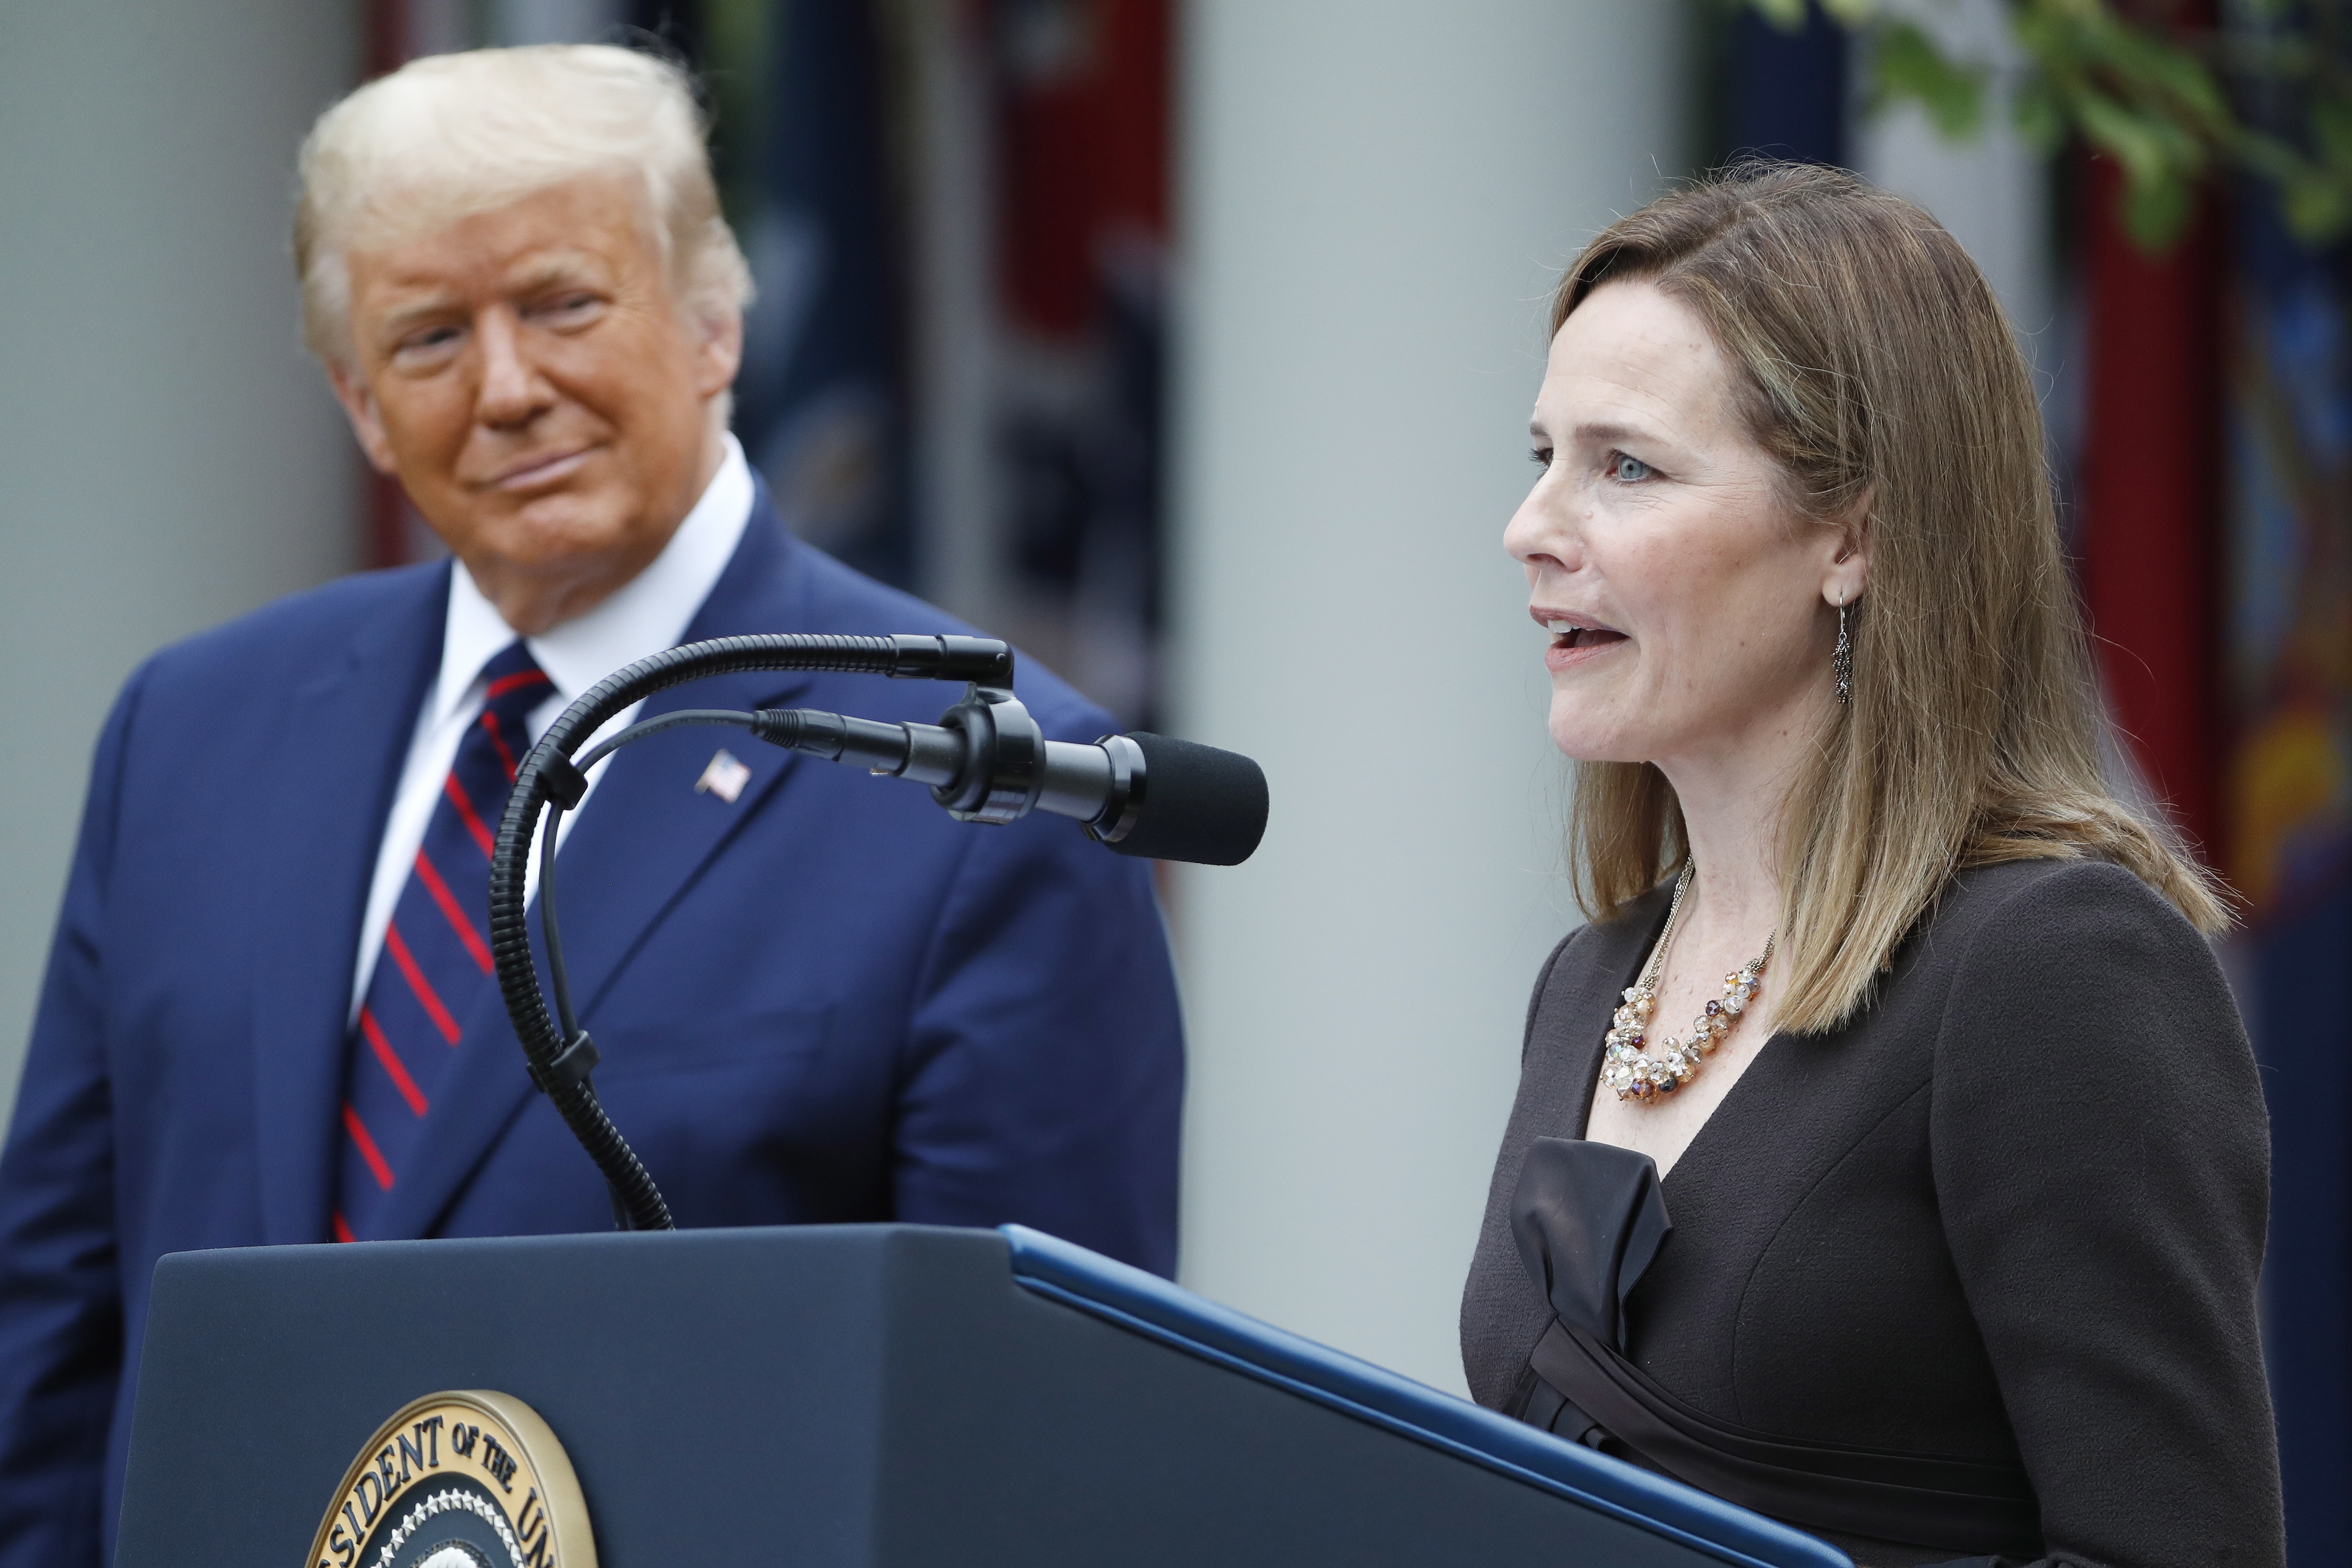 Judge Amy Coney Barrett (R) speaks after being introduced by US President Donald J. Trump as his nominee to be an Associate Justice of the Supreme Court.